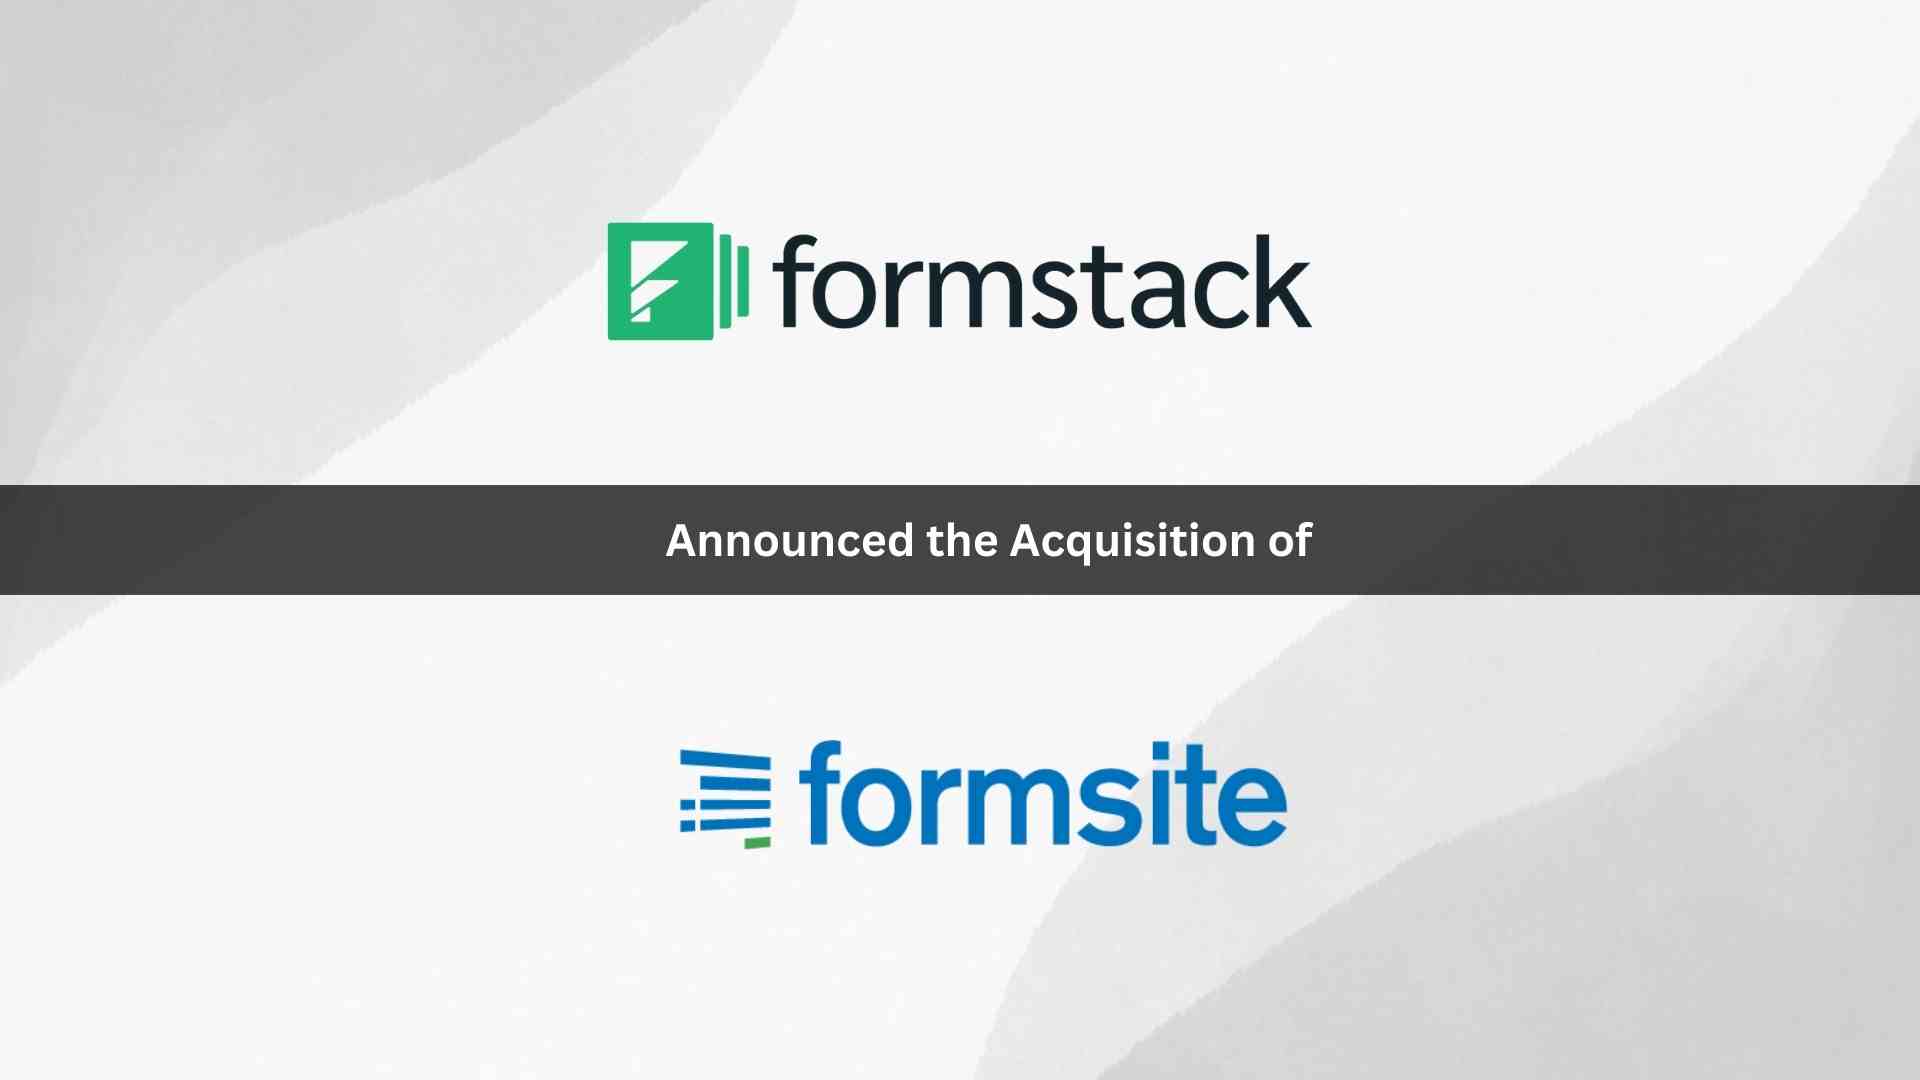 Data Capture and Workflow Automation Leader Formstack Acquires Formsite